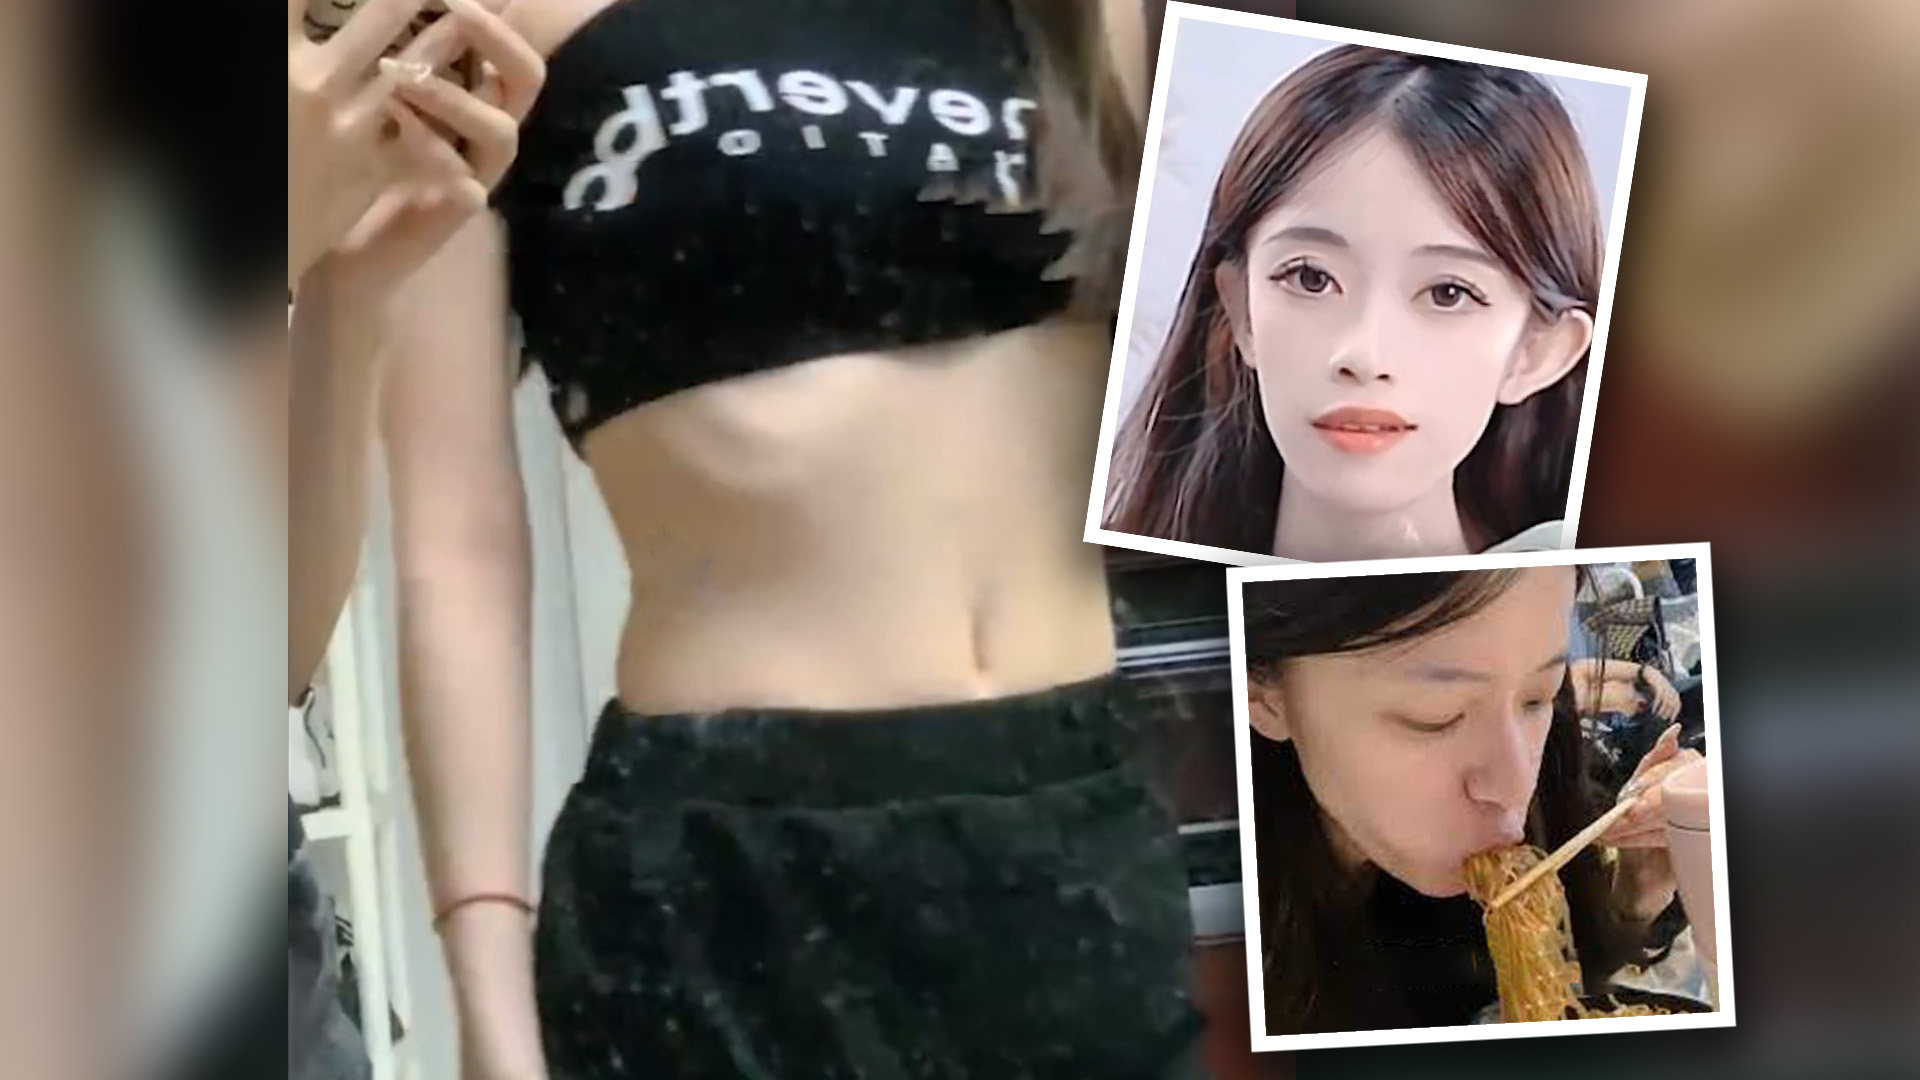 An underweight woman in China eats 6 meals a day to gain weight for influencer job and sparks health debate in China. Photo: SCMP composite